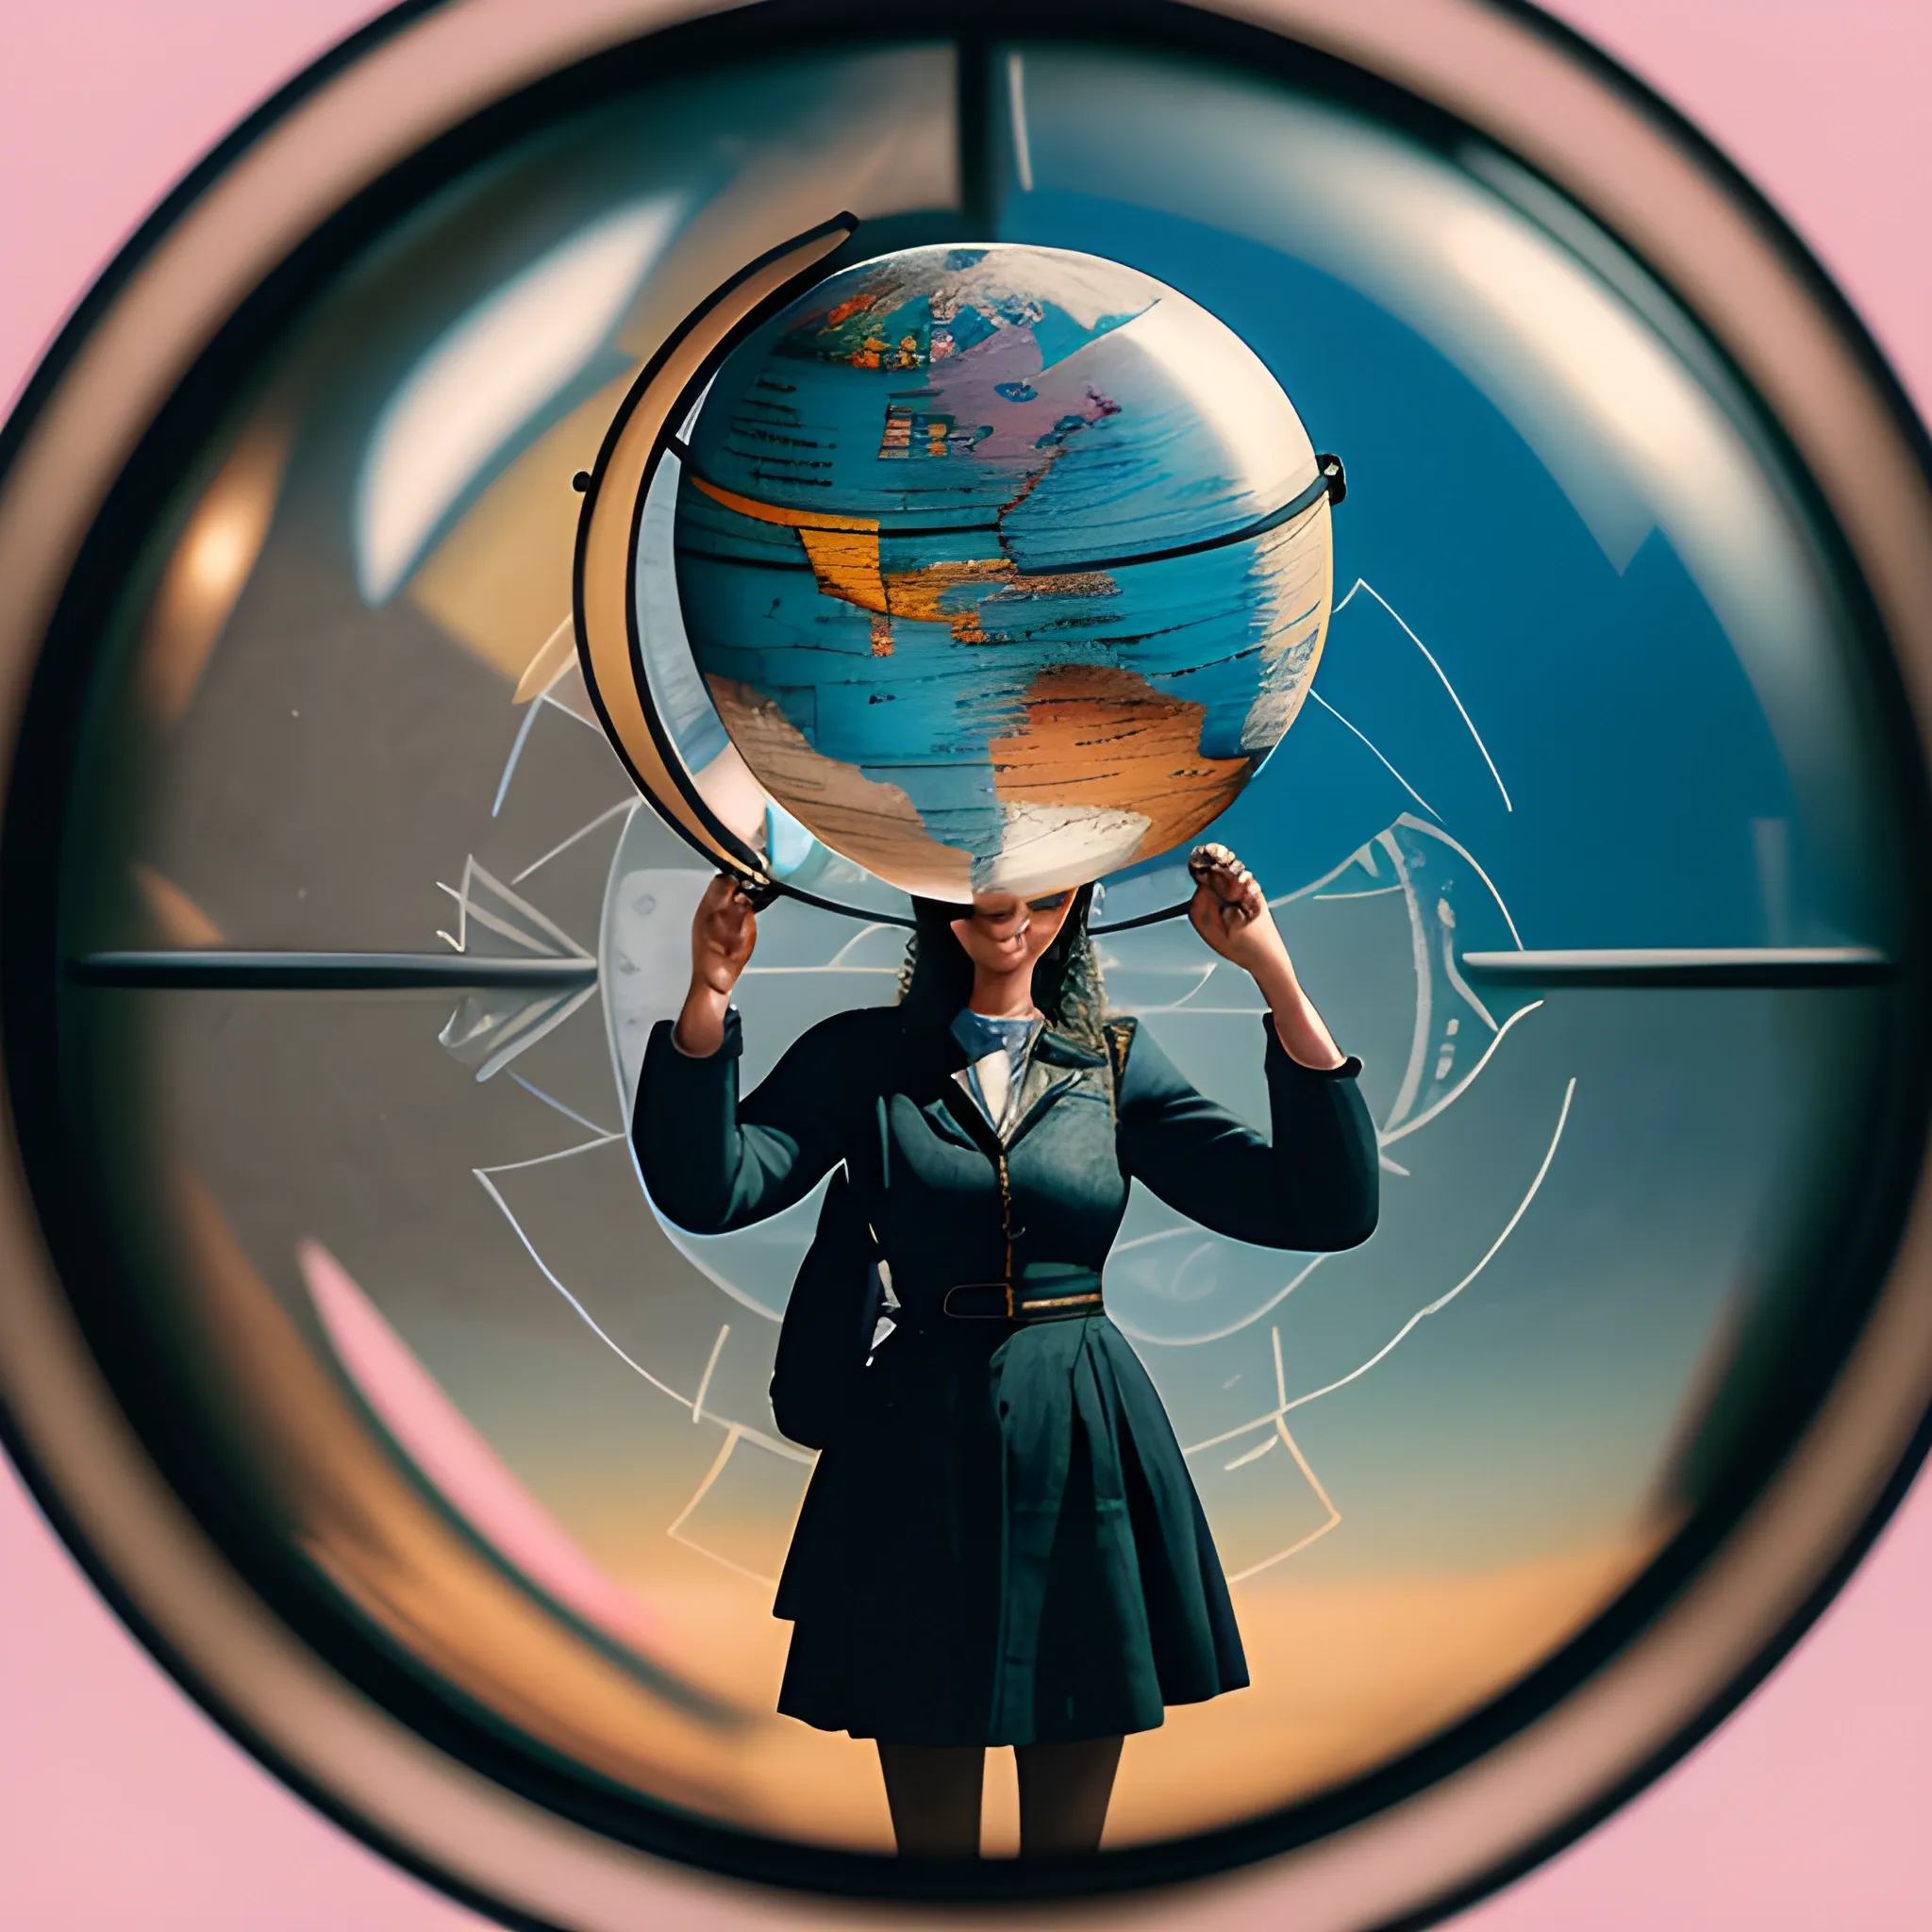 make a portrait of a female explorer standing by a window leaning on a giant globe, compass glasses flying in the air Romance, Realism, Contemporary Documentary Photography,  chaotic background, 3D, Trippy,  eerie atmosphere, close up, Oil Painting, angular perspective 